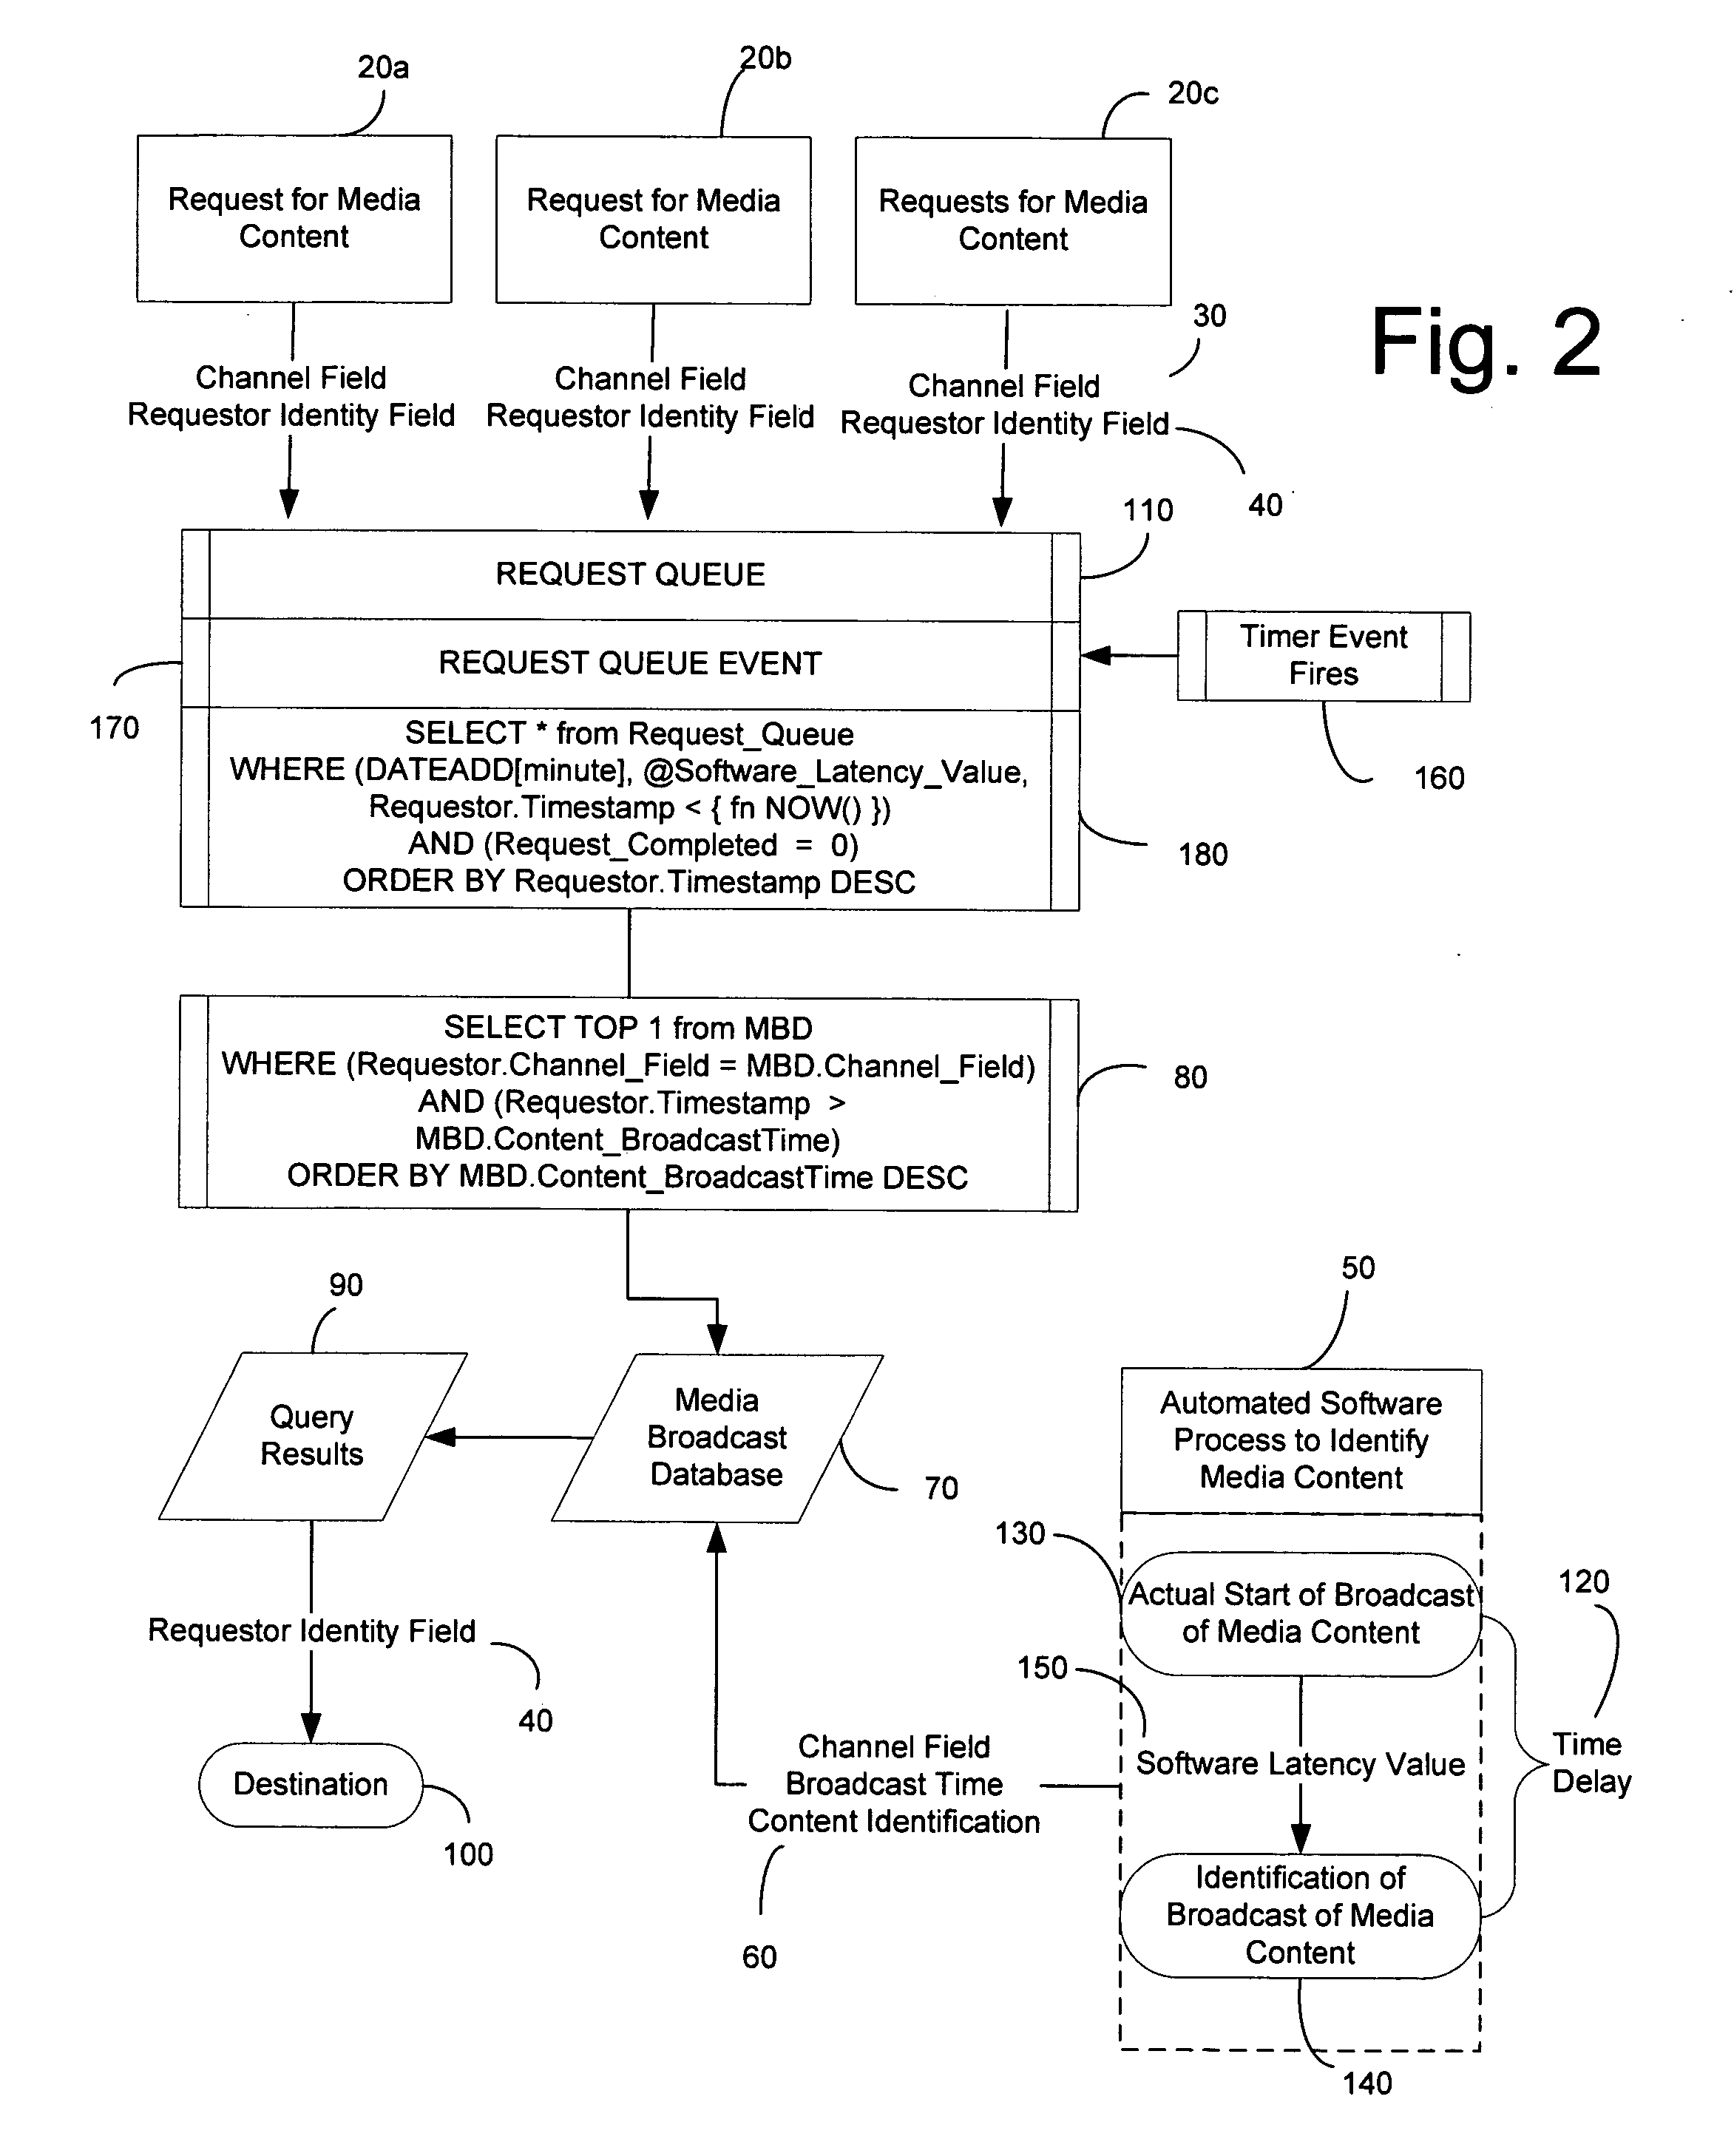 Method of Identifying Media Content Contemporaneous with Broadcast